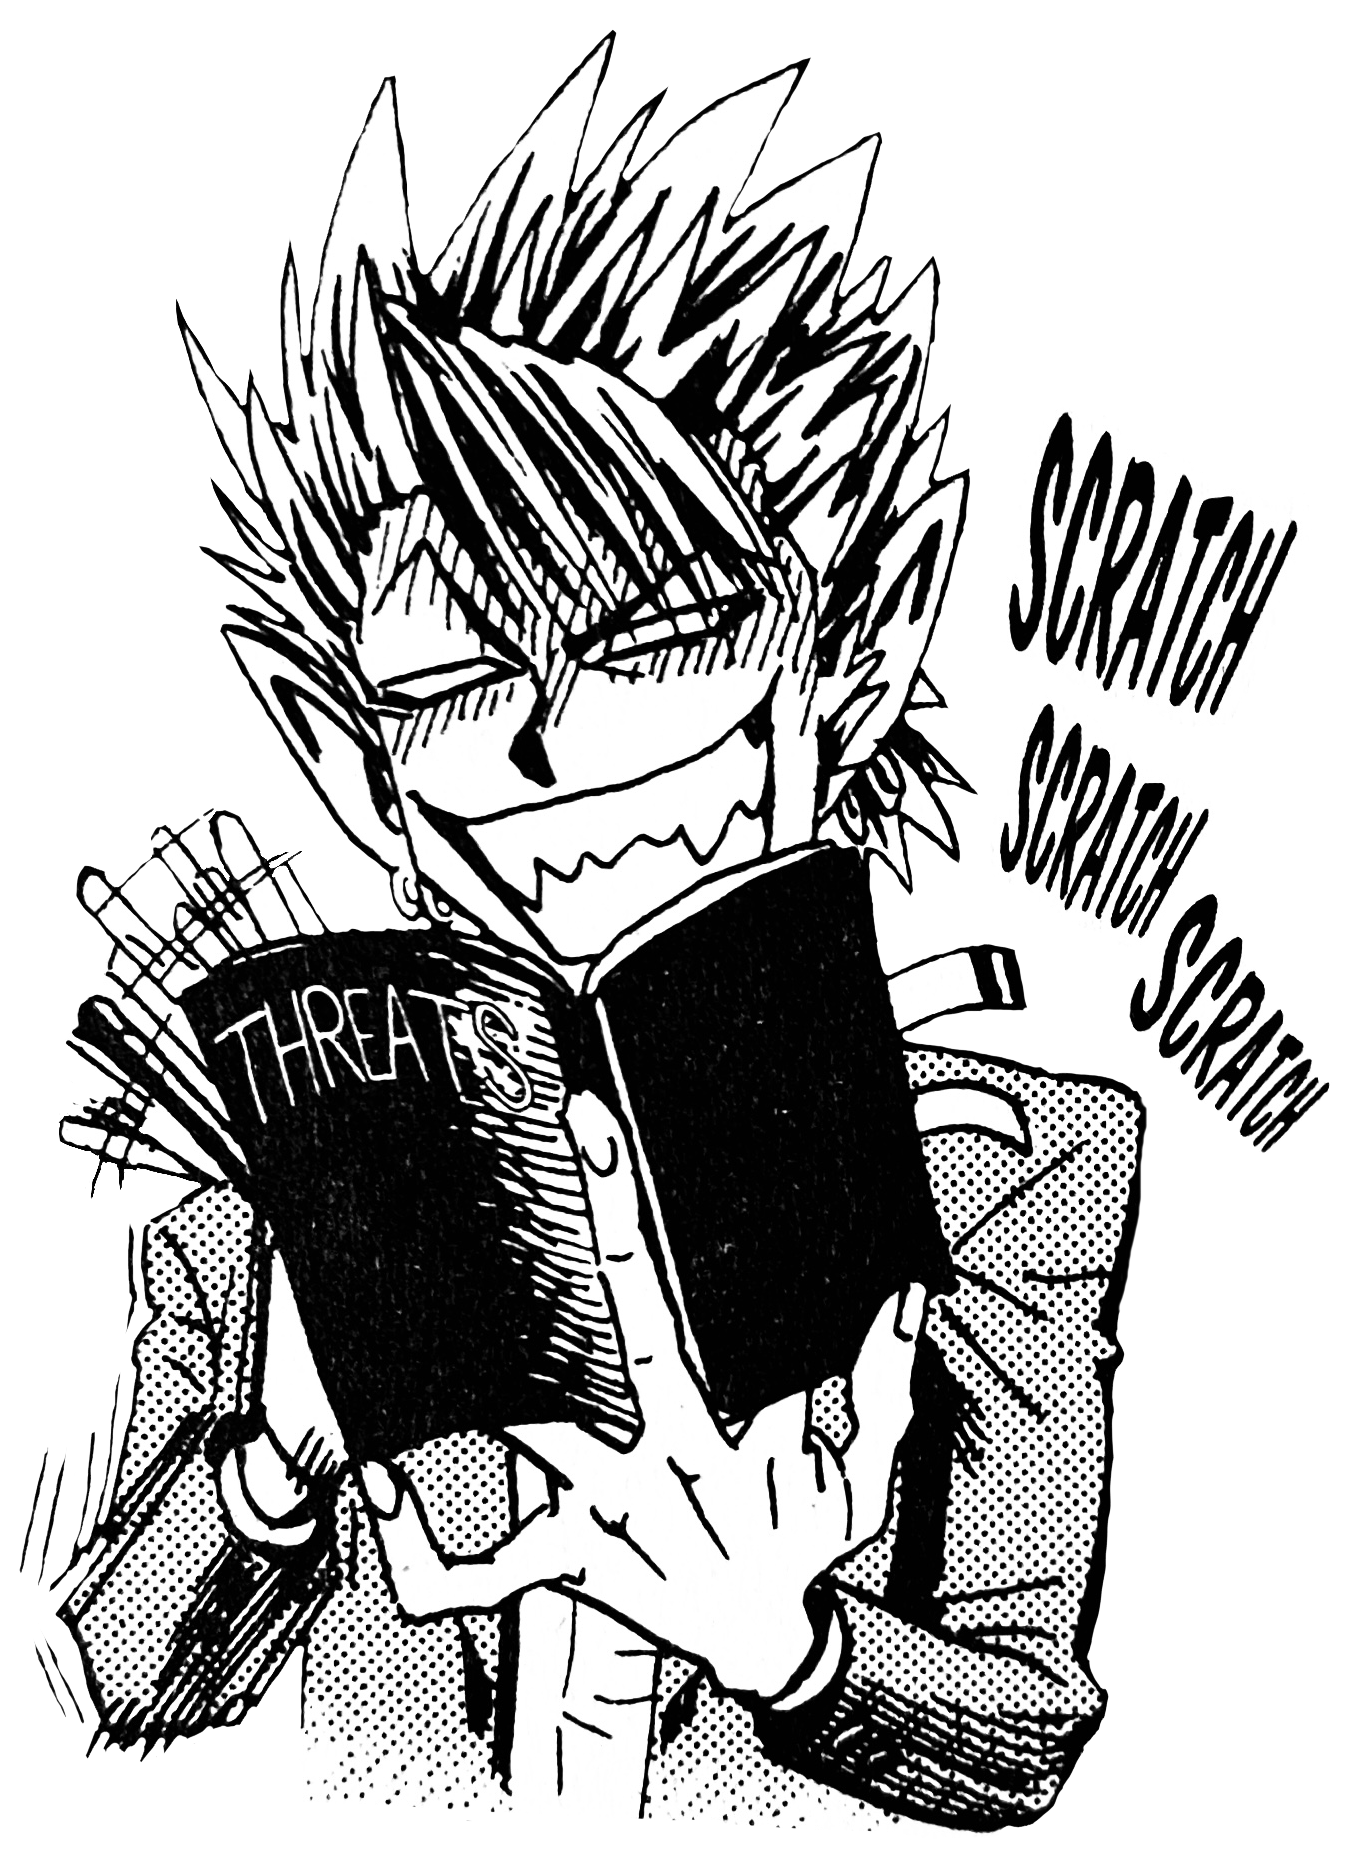 A transparent illustration of Hiruma scribbling in his Threats book noisily, with an evil grin on his face